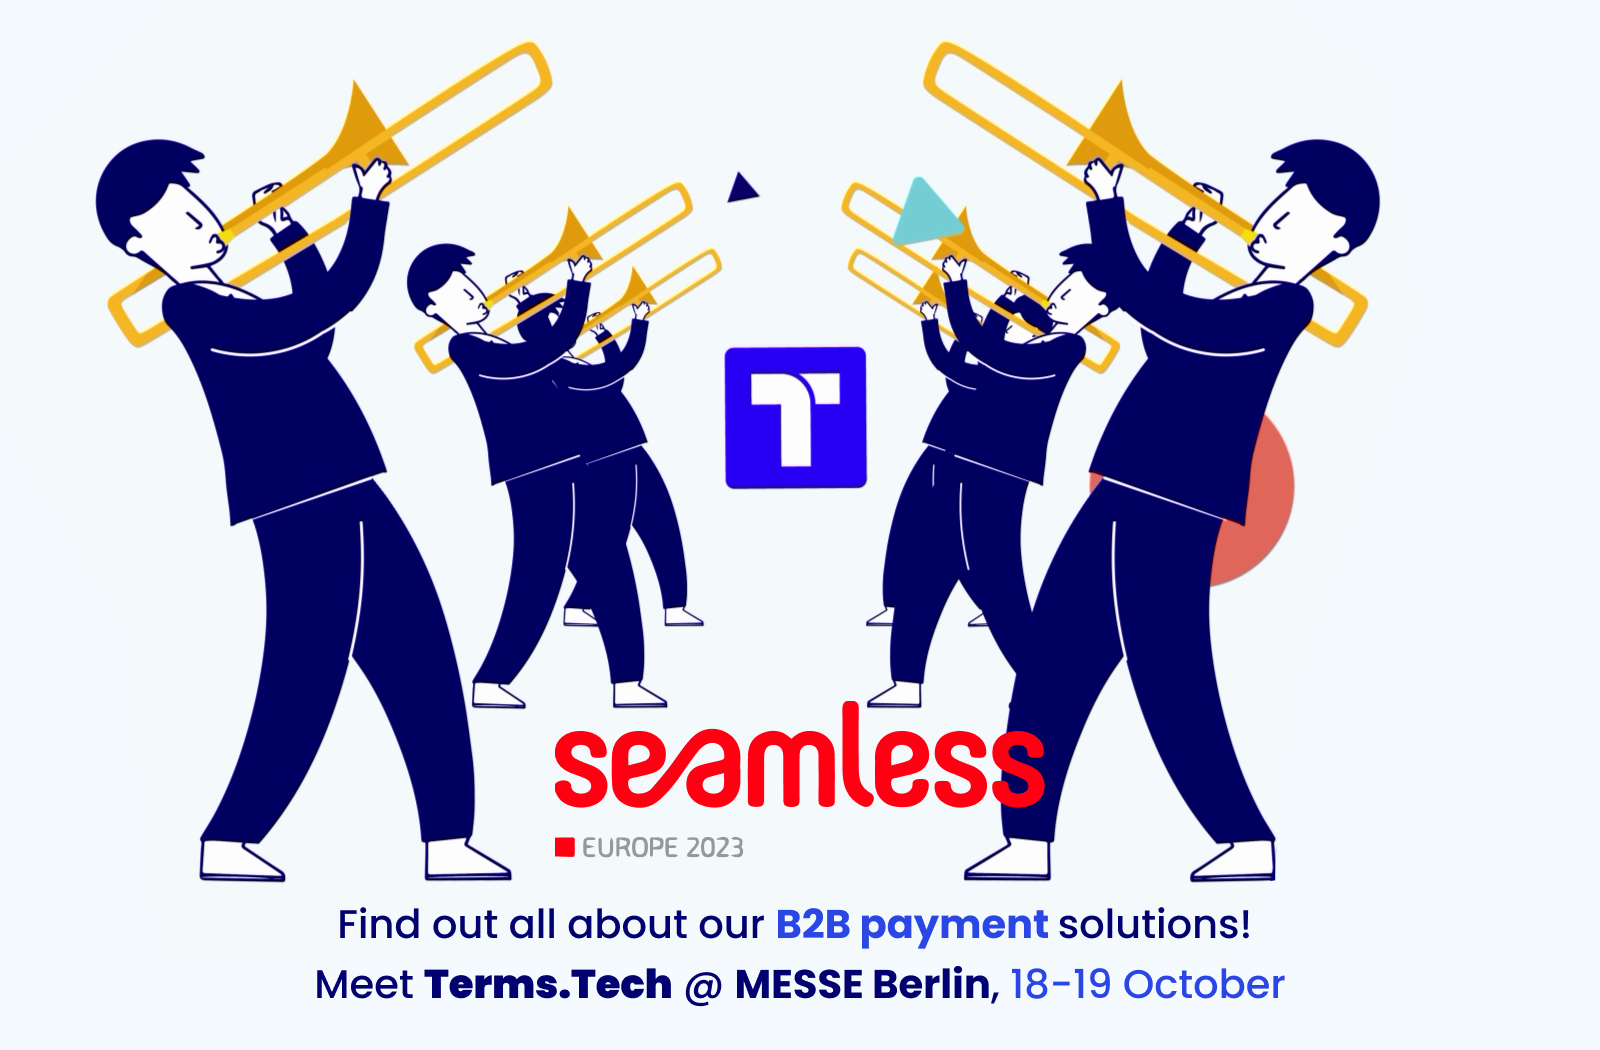 Seamless Europe 2023 brings the future of ecommerce, payments, and fintech together in Berlin. Terms.Tech delivers B2B payment services for any industry.